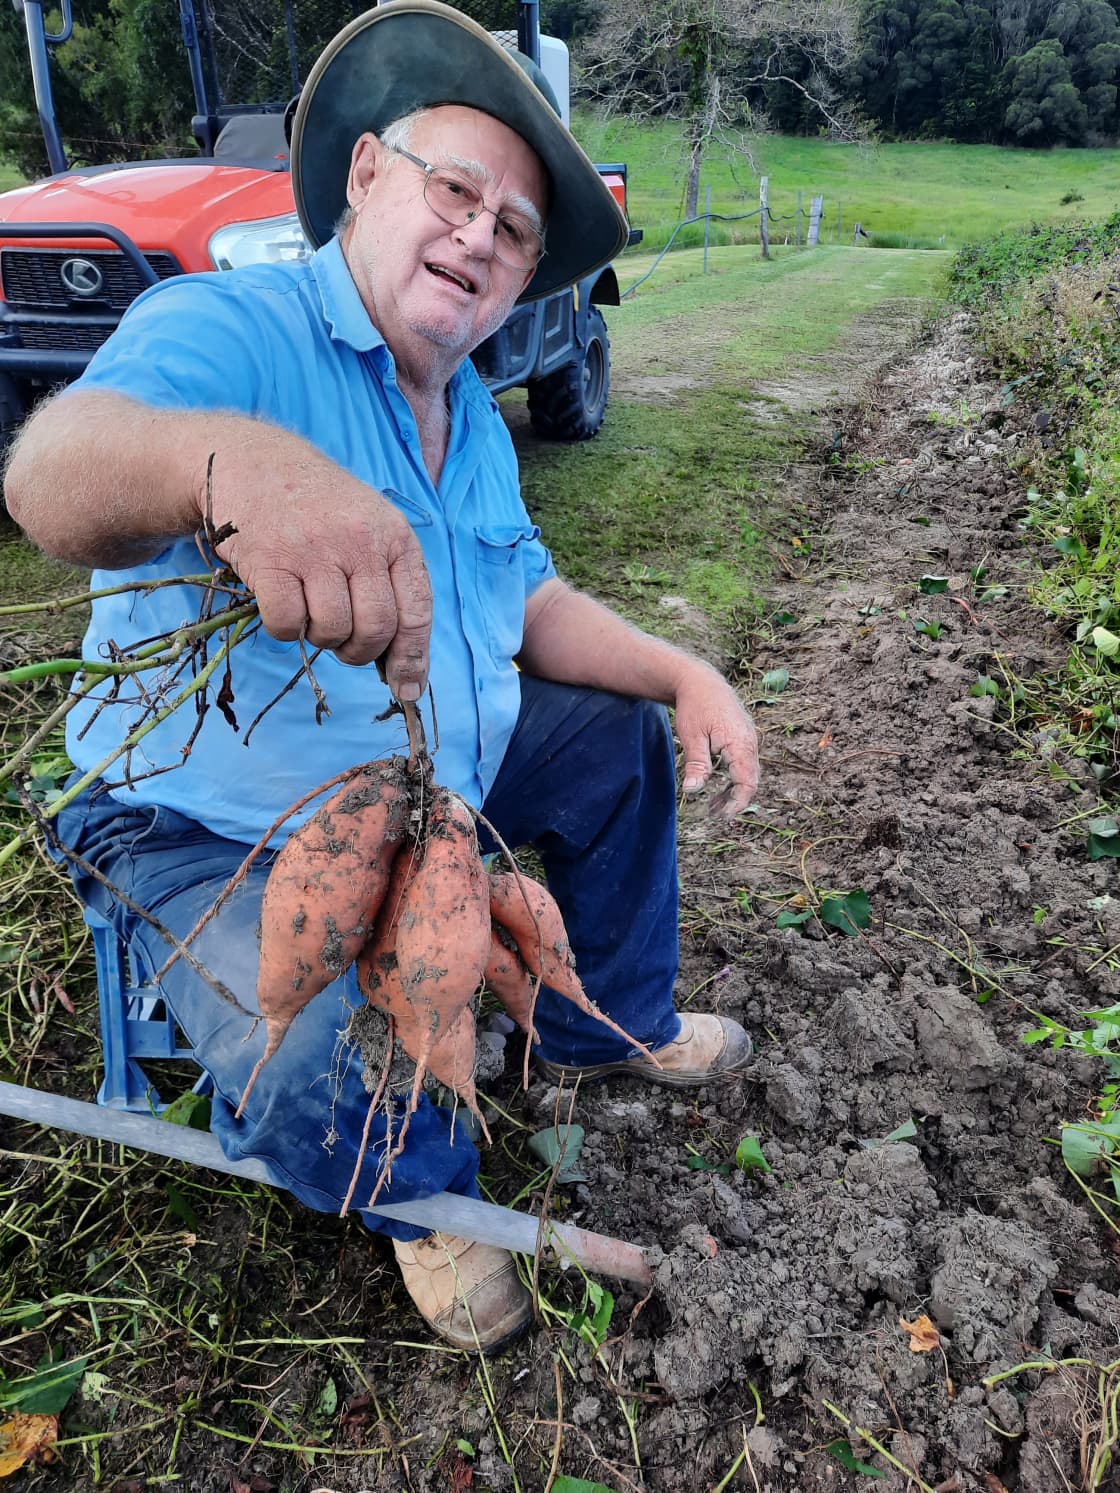 Mick digging up another lovely bunch of sweet potatoes.  